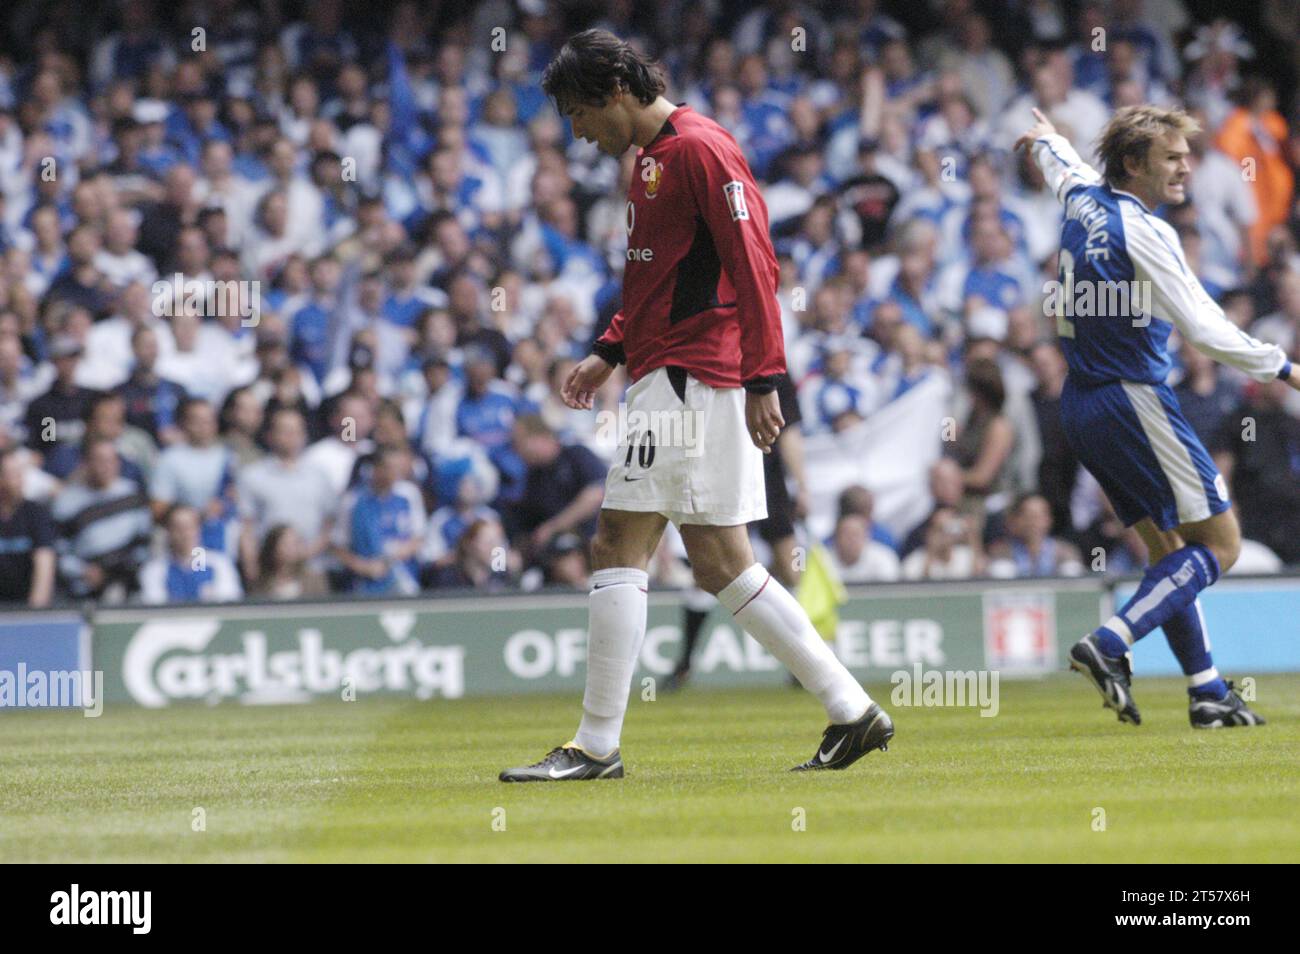 Ruud van Nistelrooy – Before the FA Cup Final 2004, Manchester United v Millwall, May 22 2004. Man Utd won the match 3-0. Photograph: ROB WATKINS Stock Photo